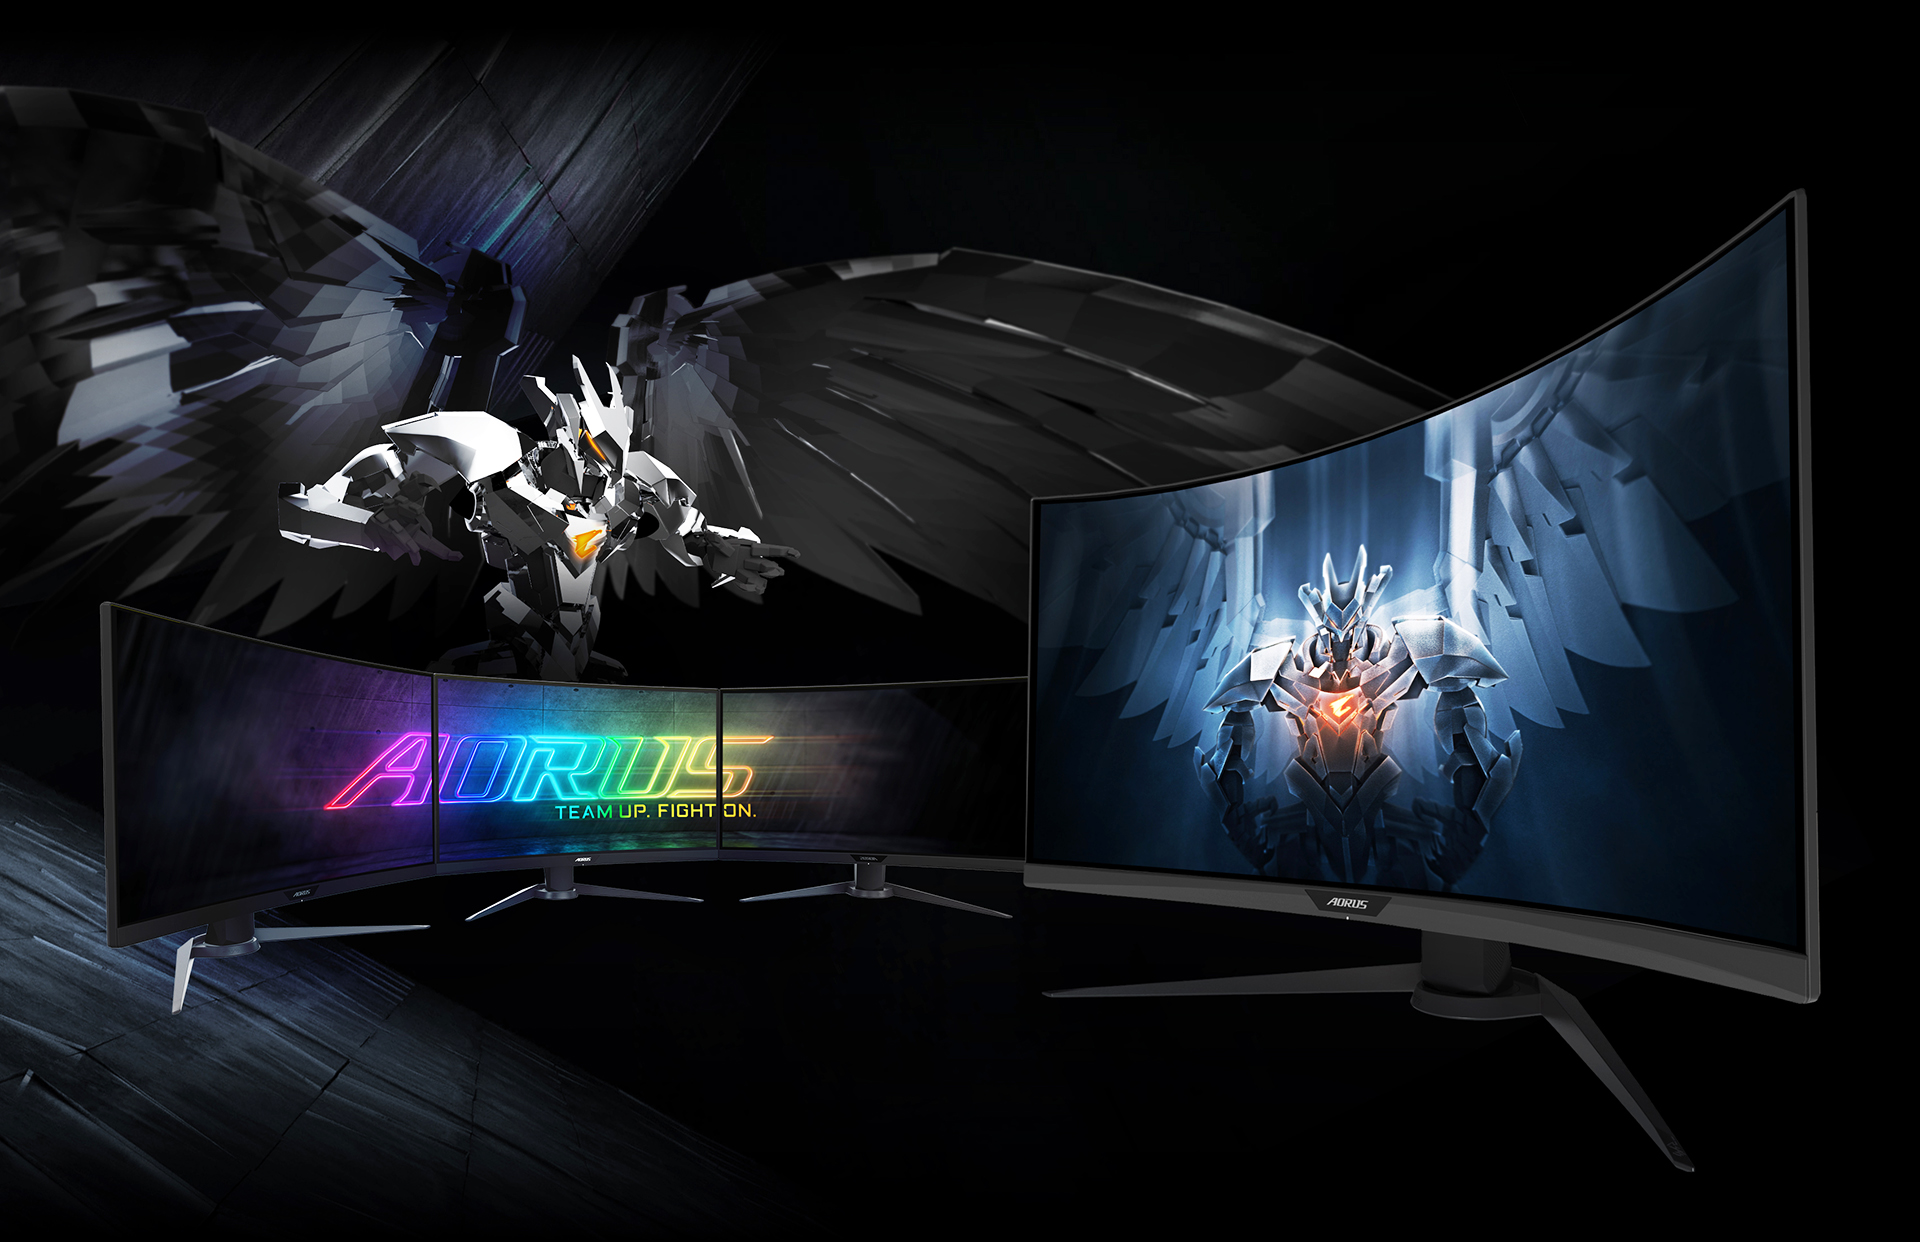 A Set of Three AORUS Monitors Side by Side, Forming a Connected Display of the AORUS Team Up, Fight On Logo. Behind the Monitor Is the Aorus CGI Character, and to the Right of All This Is Another Monitor Angled to the Left with Graphic Artwork of the Aorus Character